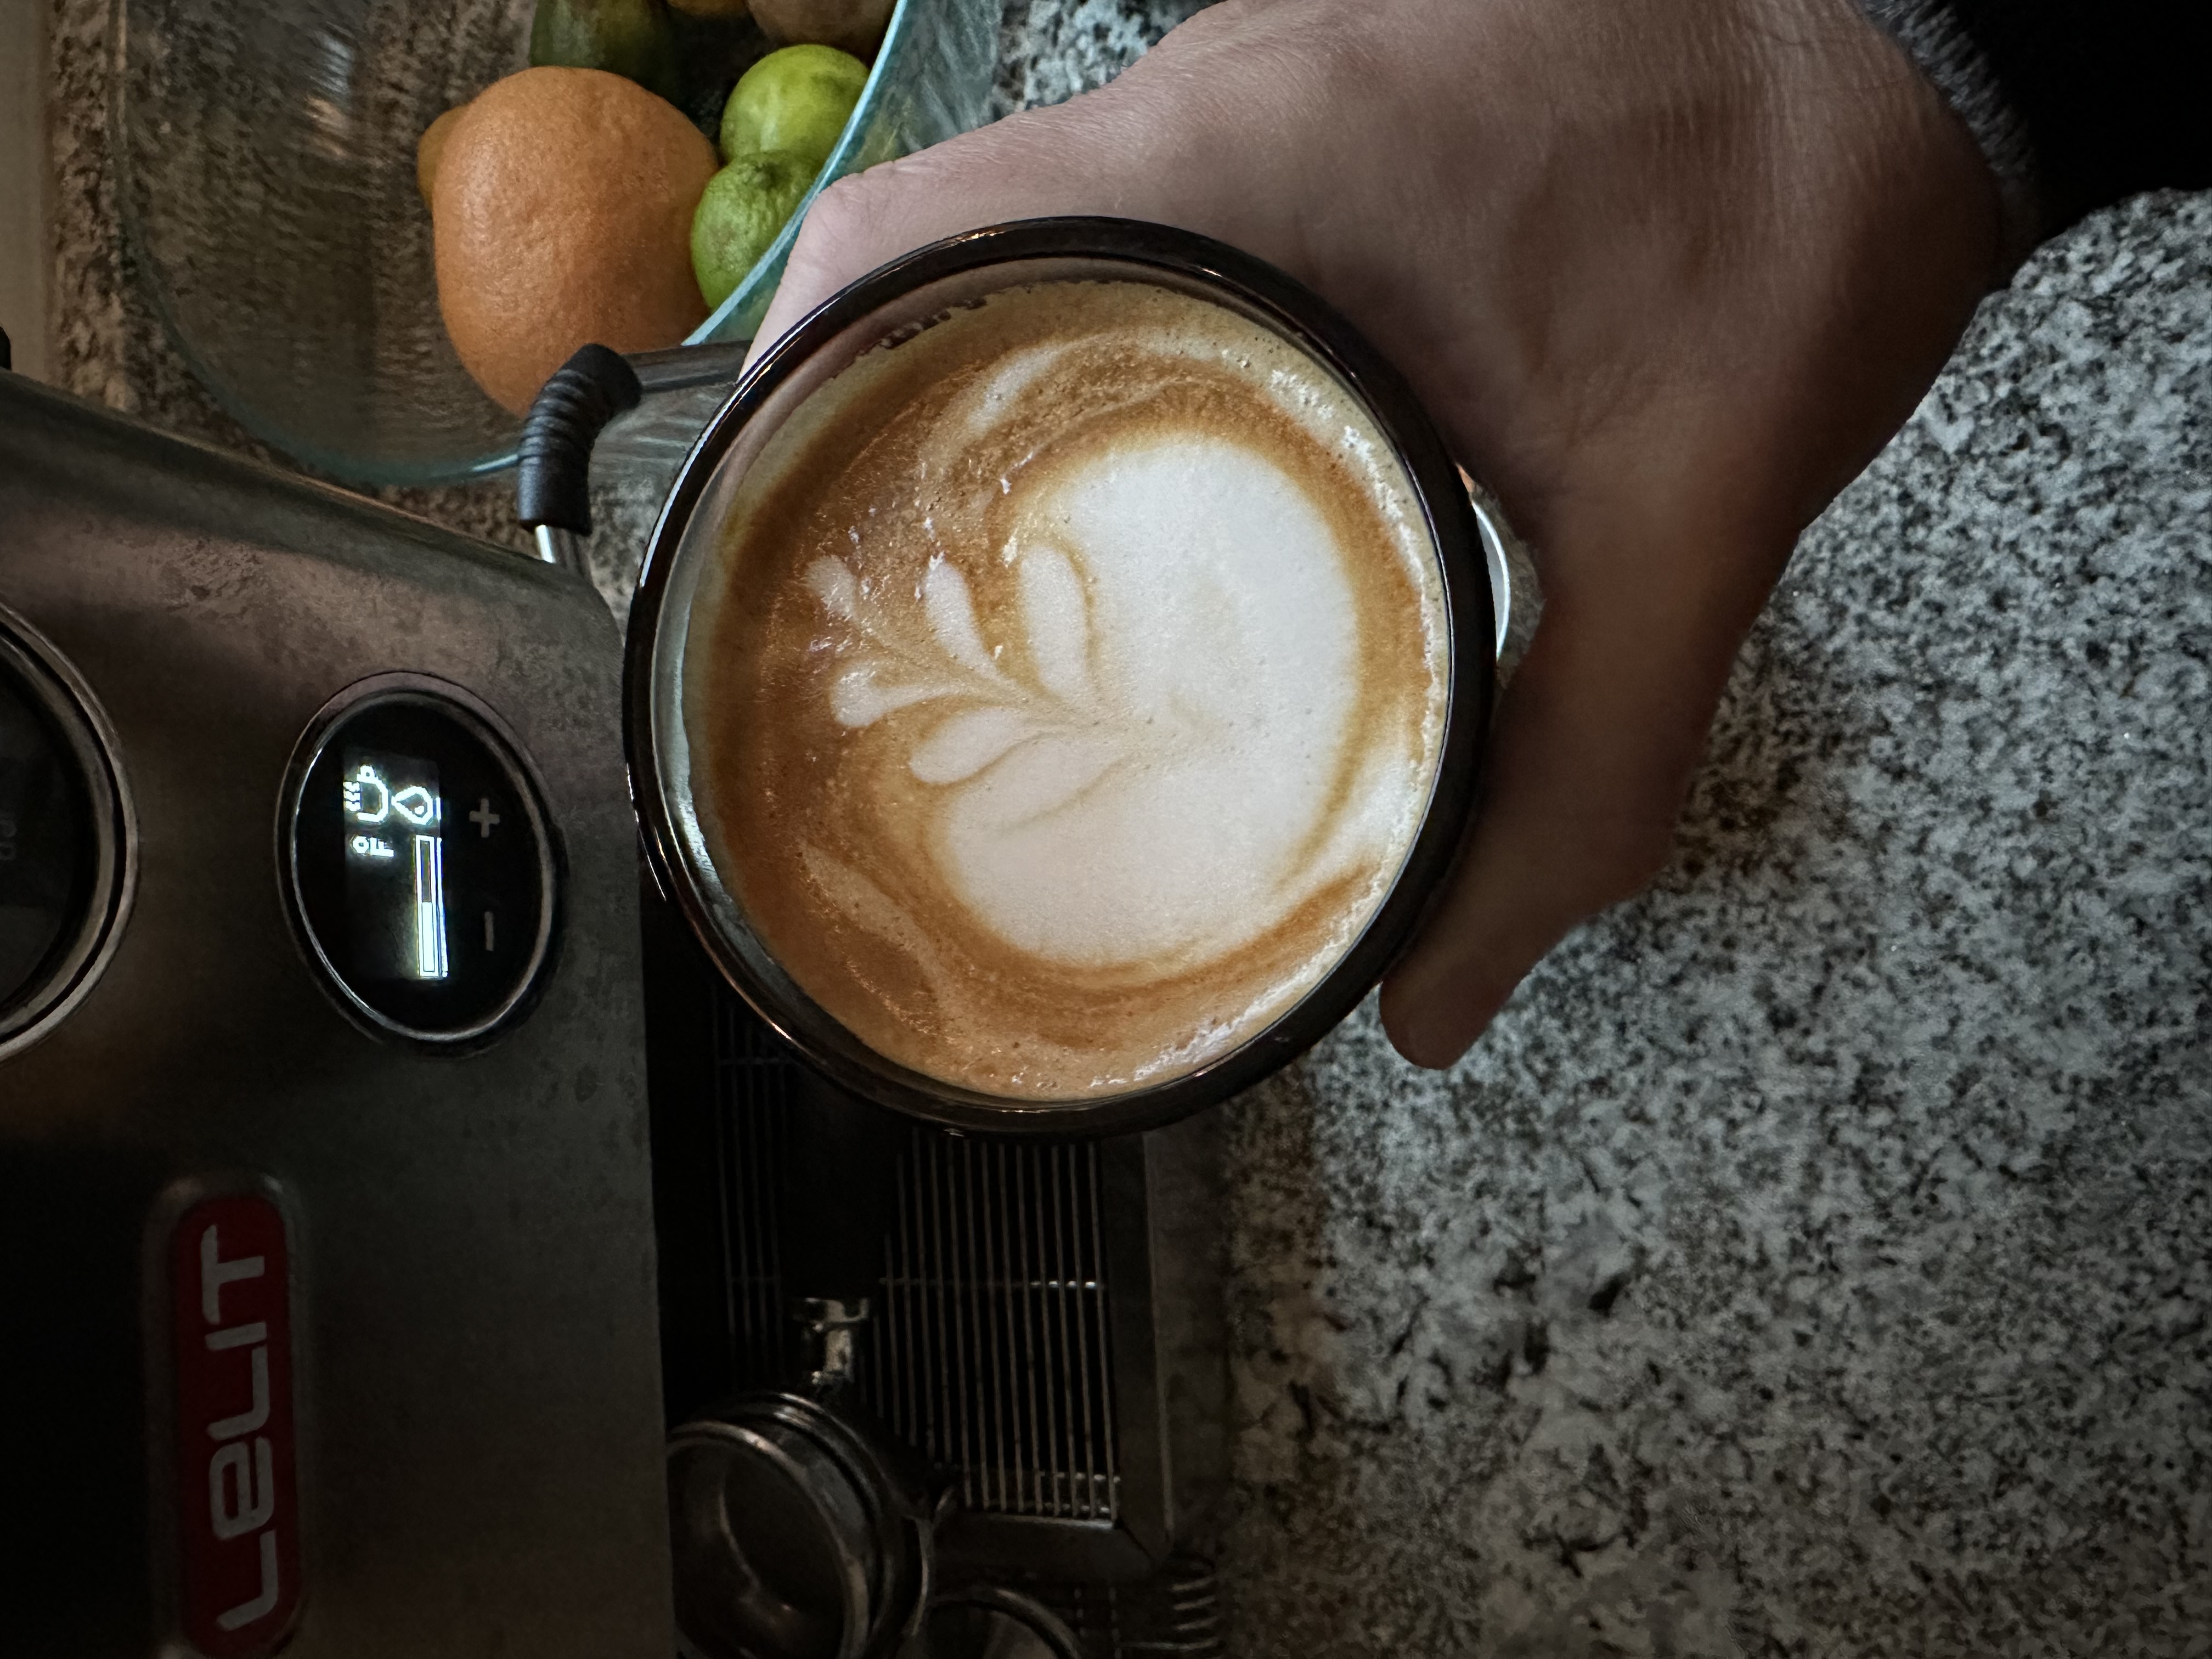 A hand holds a gray glass of cappuccino above a speckled black and white countertop. The cappuccino is a brown sugar color with a bulbous and somewhat accidental looking floret of steamed milk poured on top.